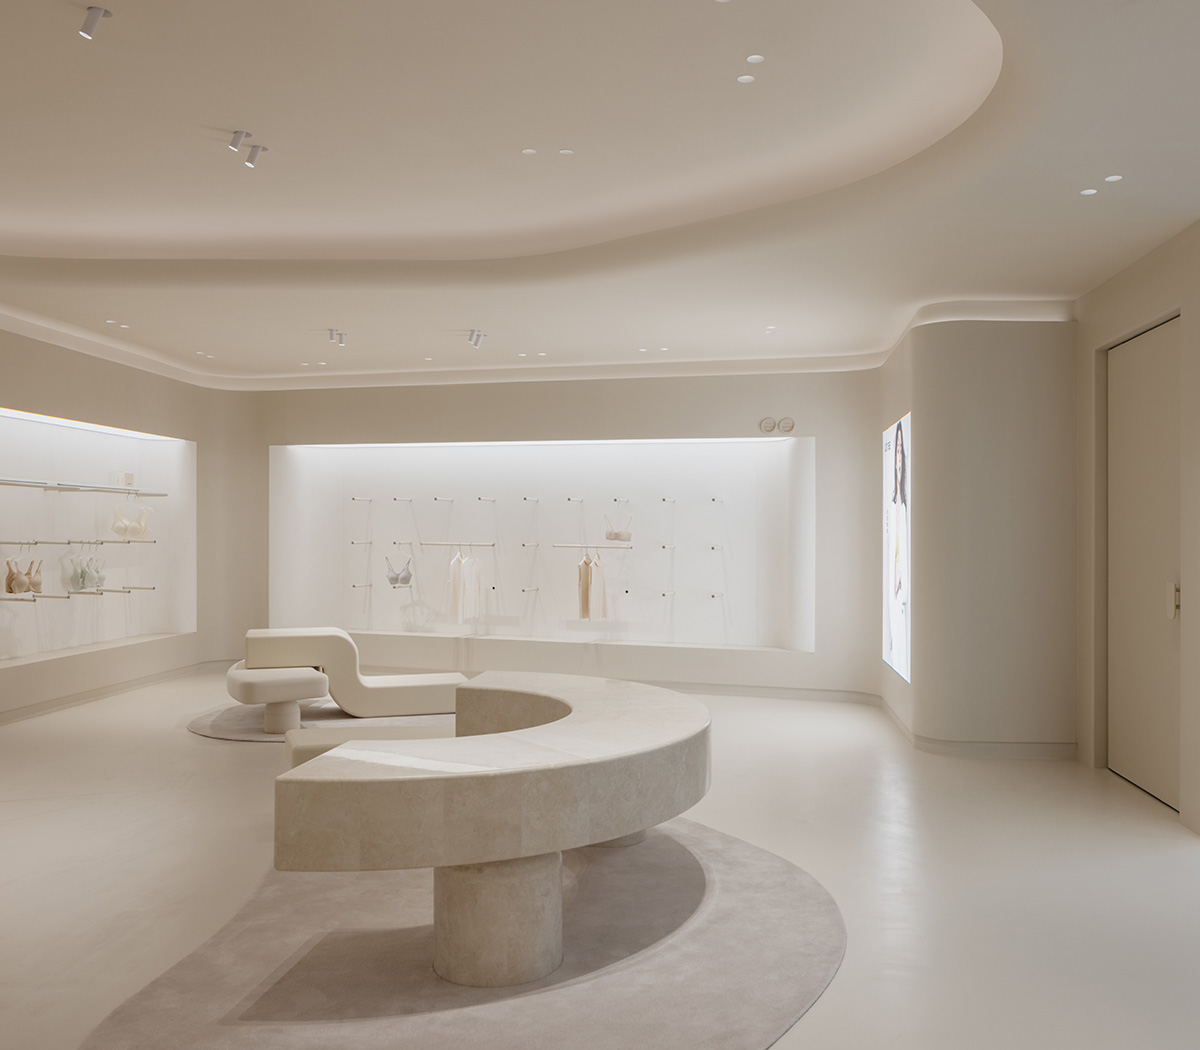 Store interiors by Sò Studio features soft beige tones to give the feeling of 